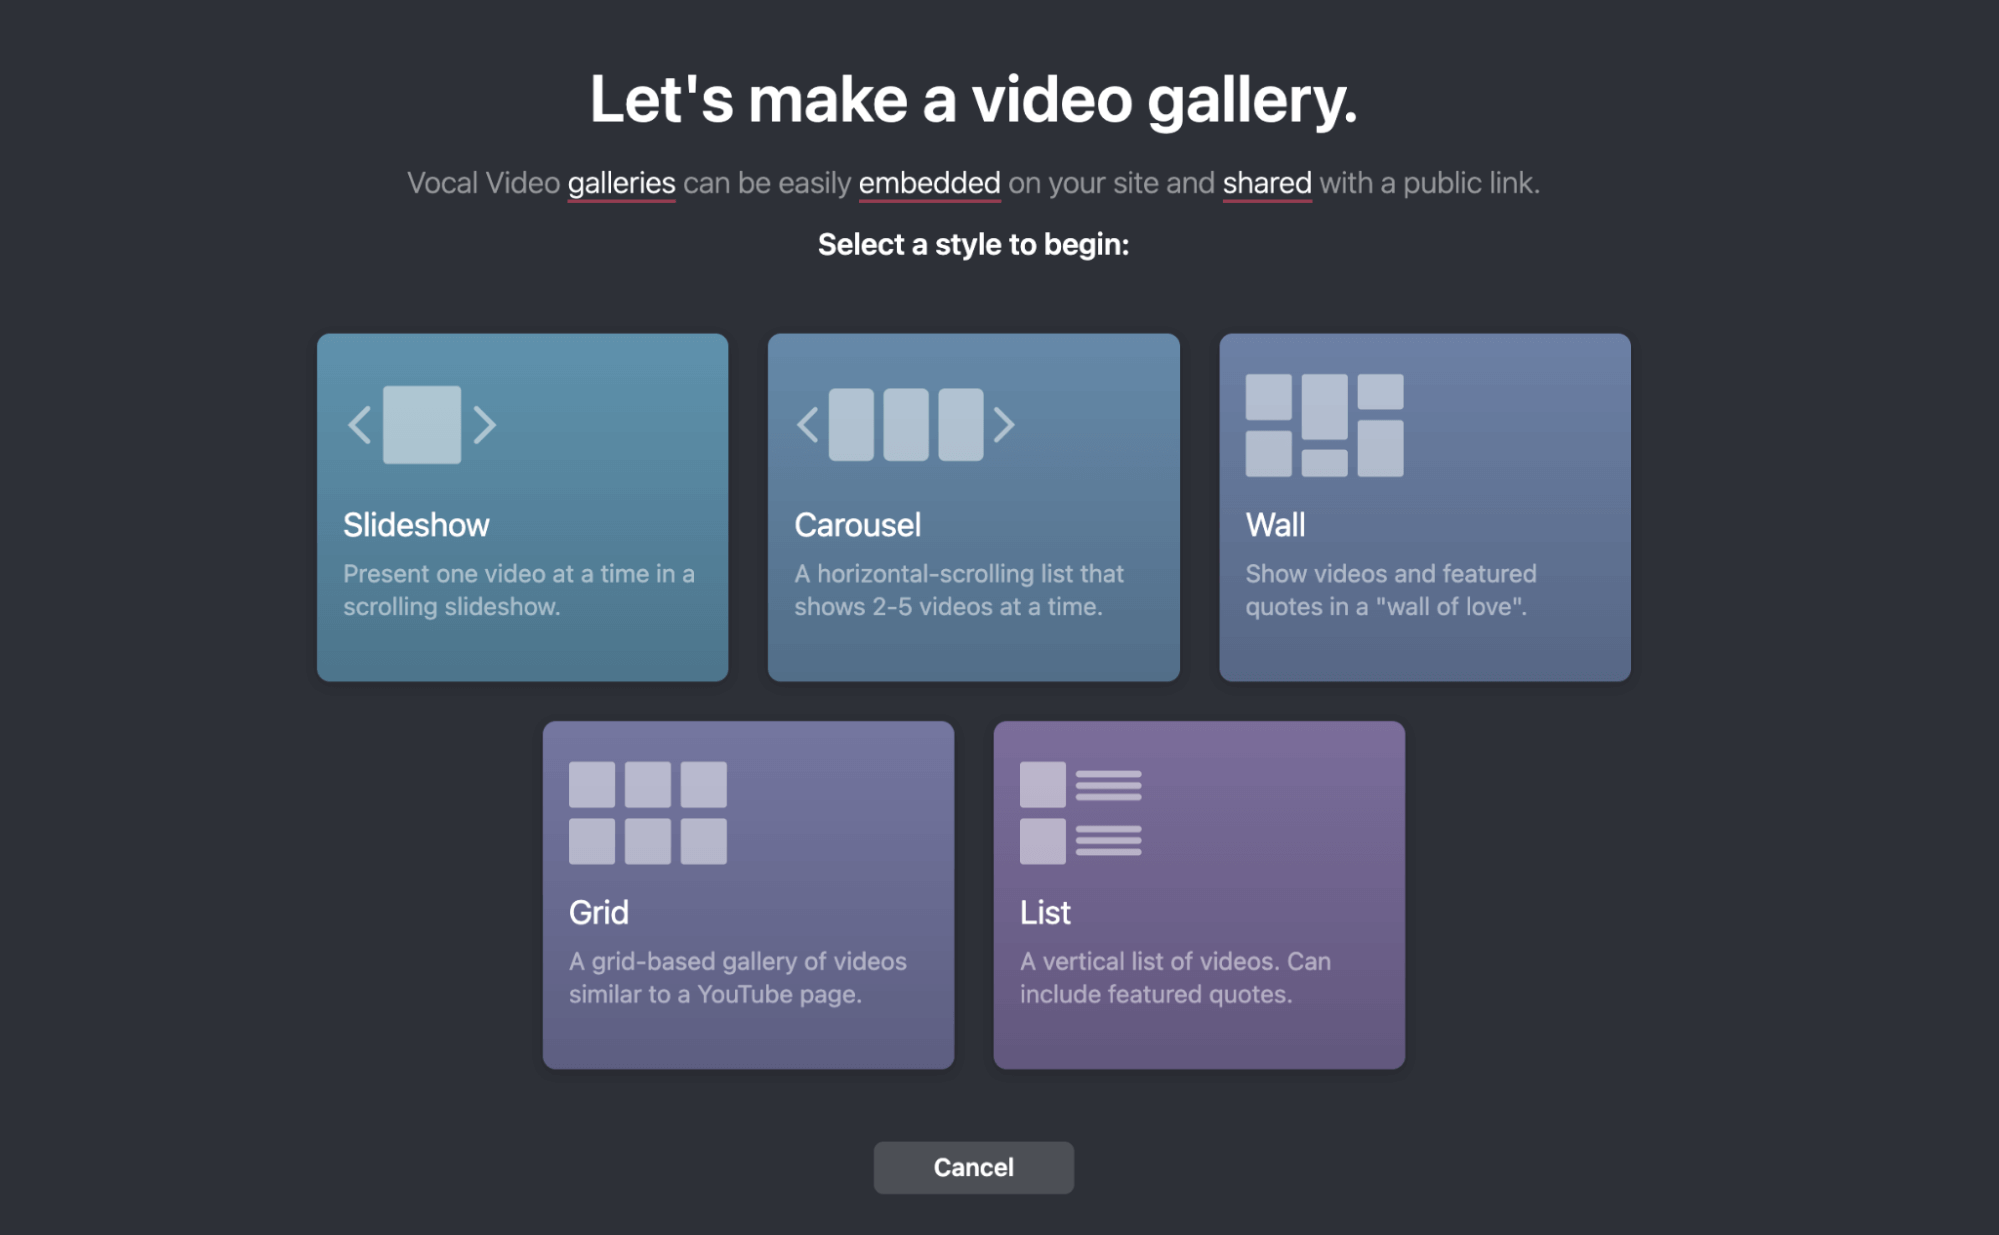 Let's make a video gallery: Vocal Video galleries can be easily embedded on your site and shared with a public link. Select a style to begin: Slideshow, Carousel, Wall, Grid, List.